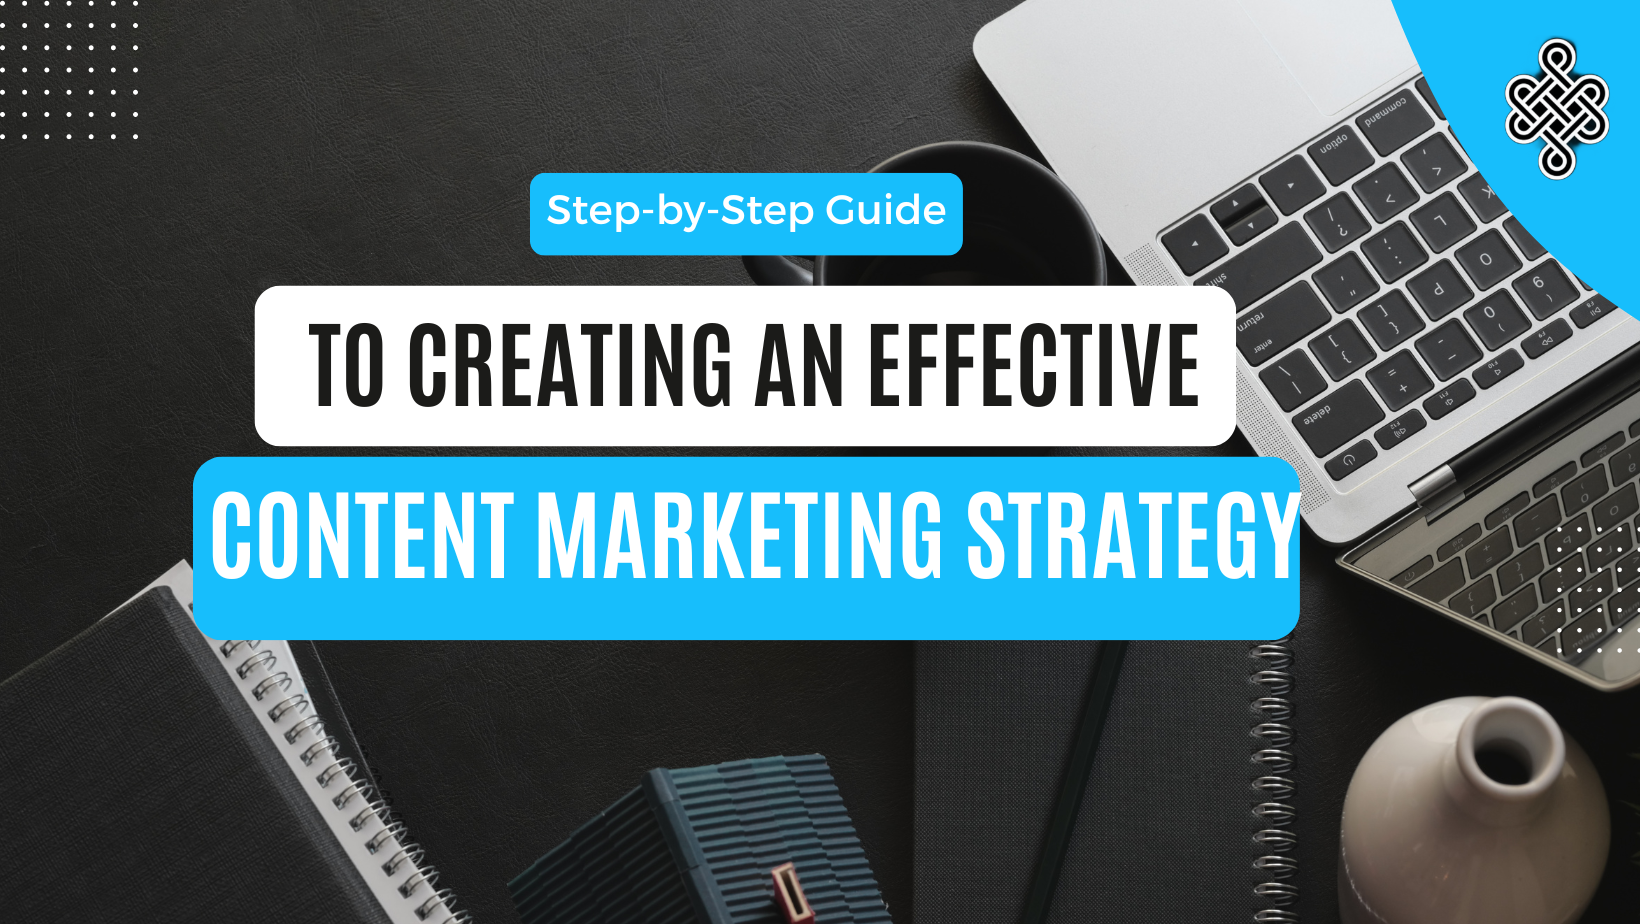 A Step-by-Step Guide to Creating an Effective Content Marketing Strategy